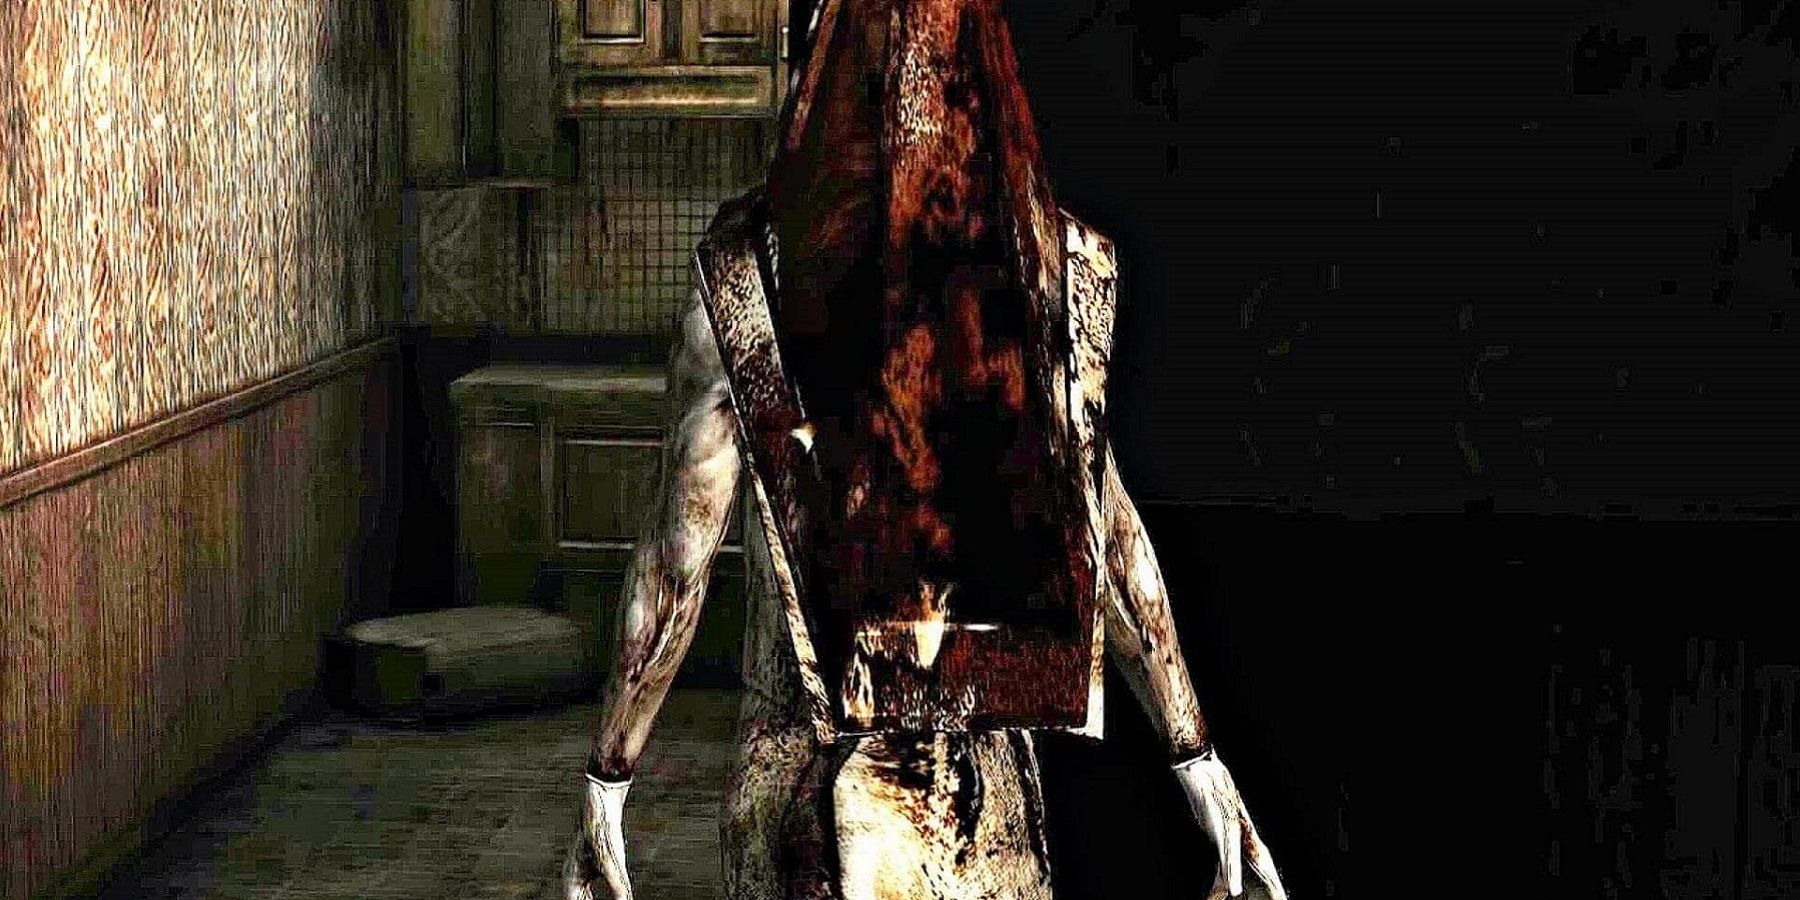 Screenshot from Silent Hill 2 showing Pyramid Head in a grimy apartment.